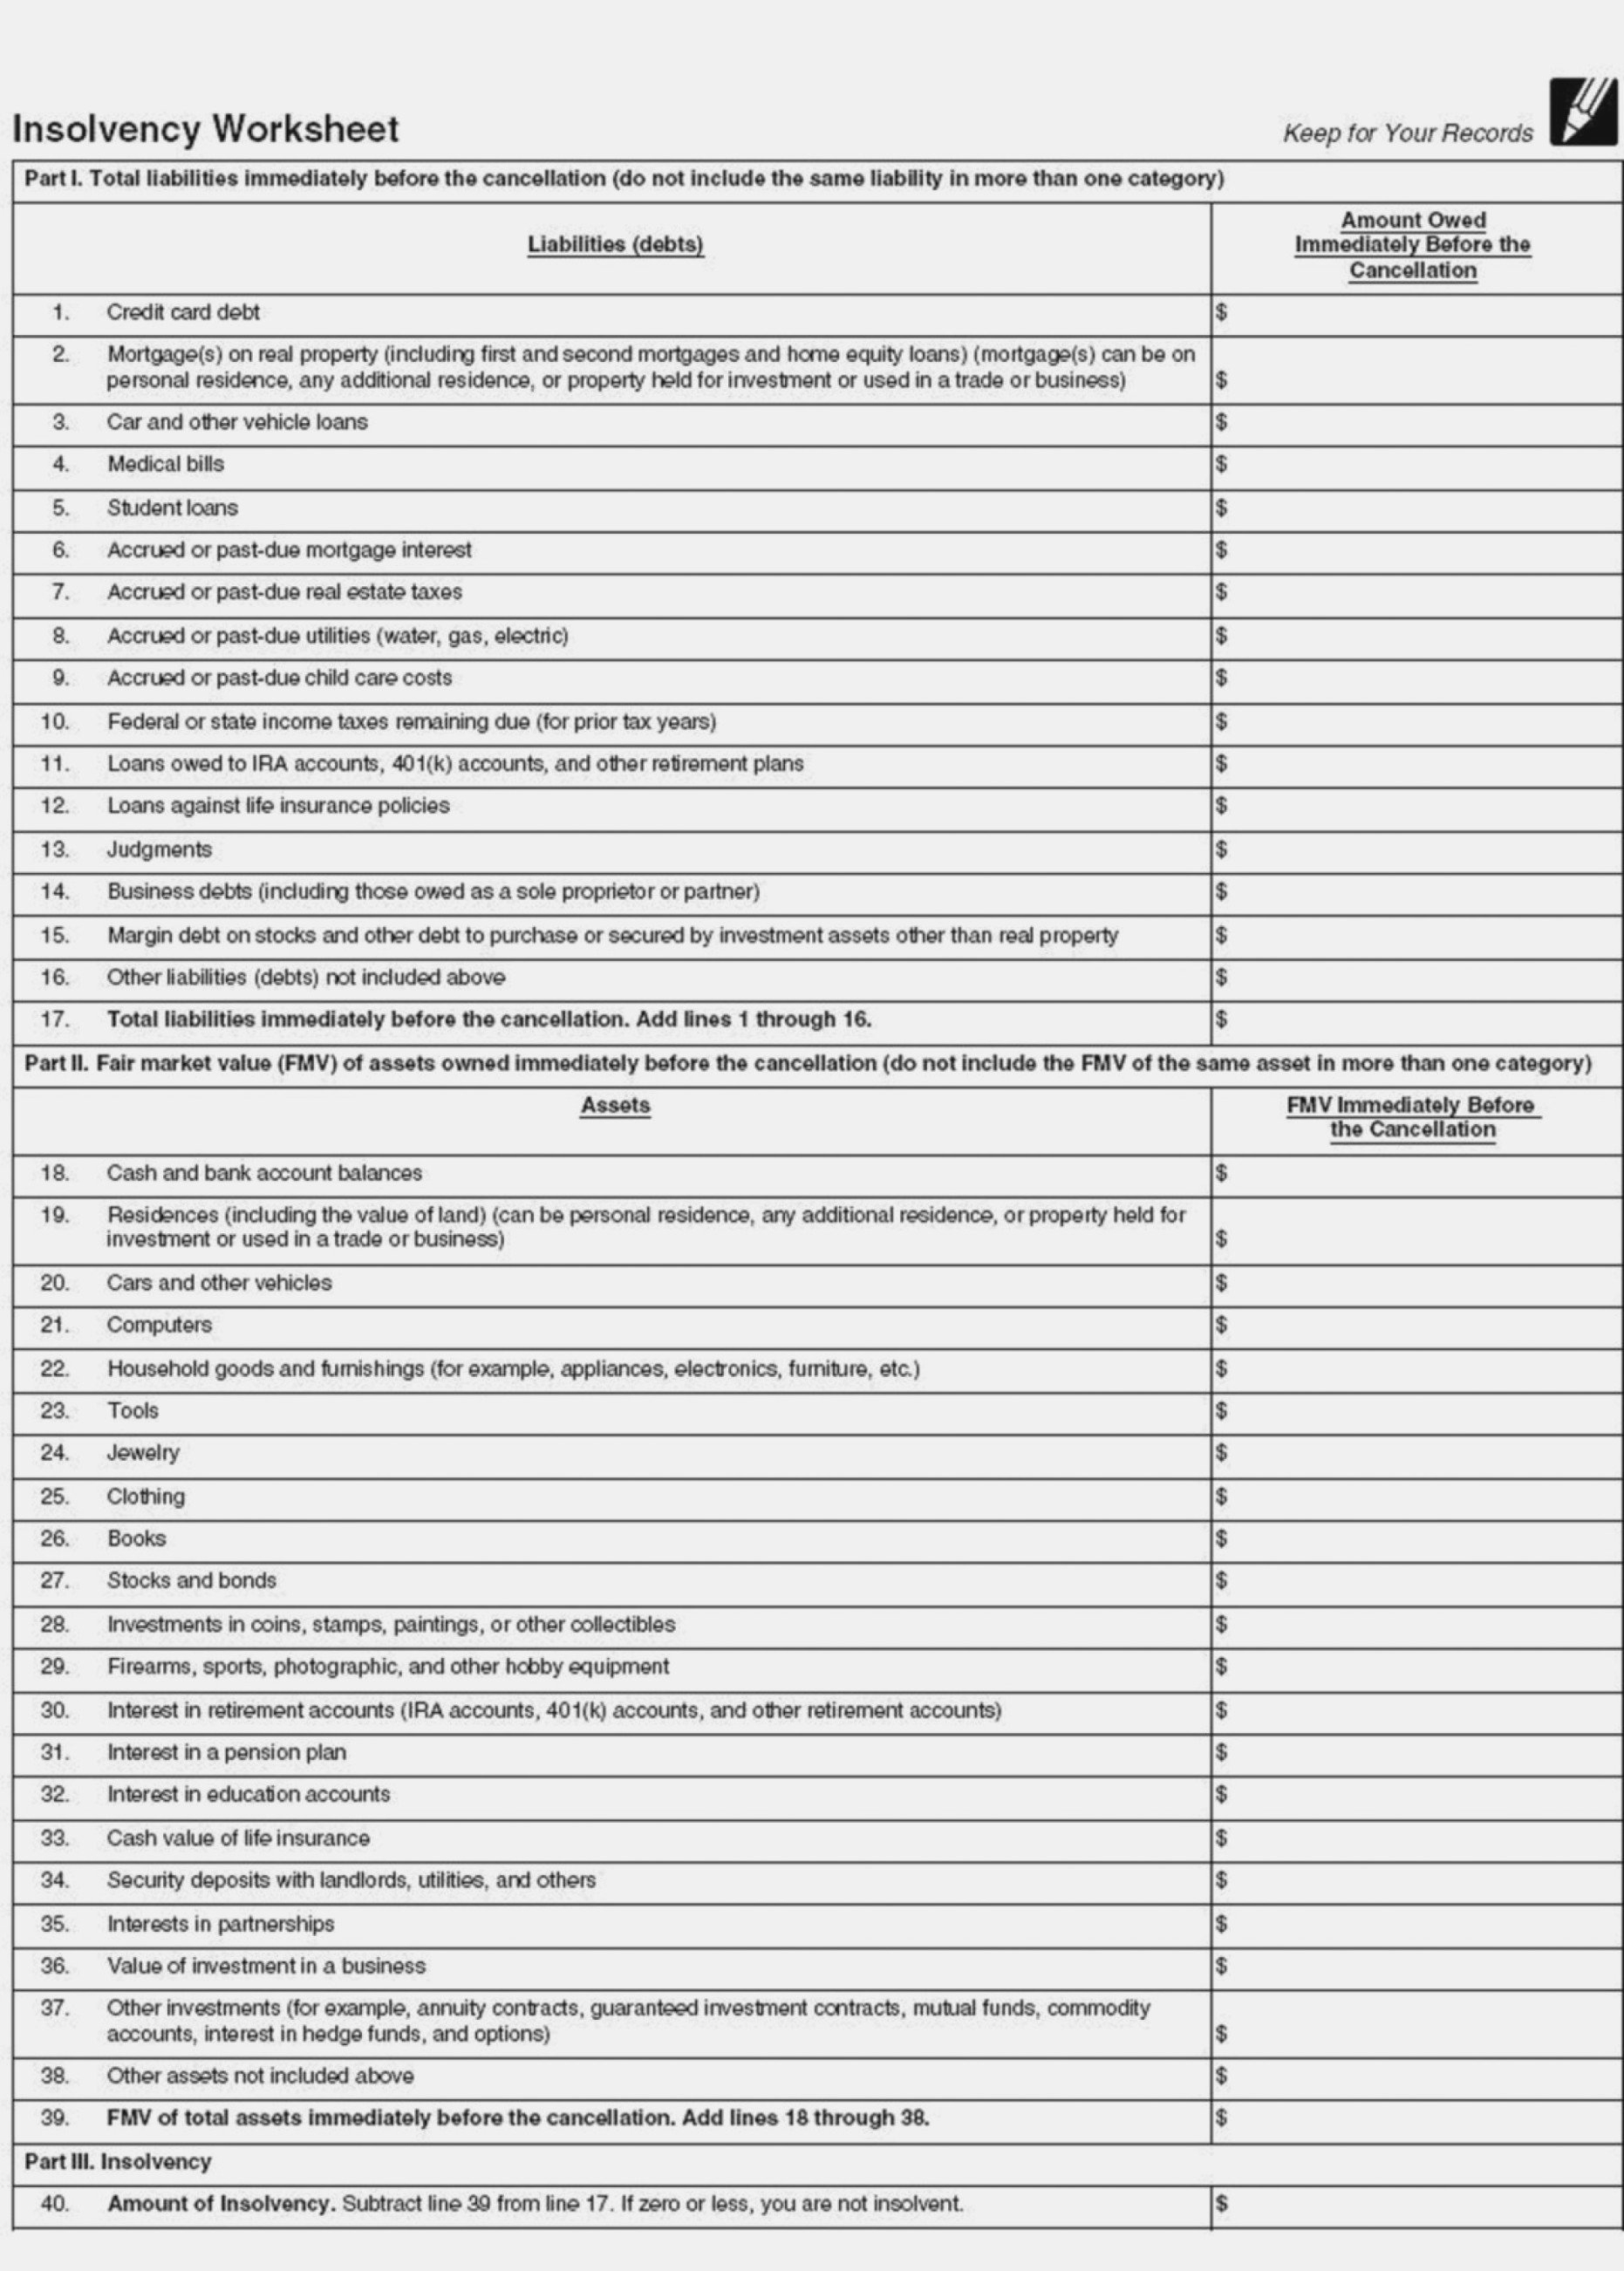 Example Insolvency Worksheet Irs – Livinghealthybulletin – Irs Form For Form 982 Insolvency Worksheet